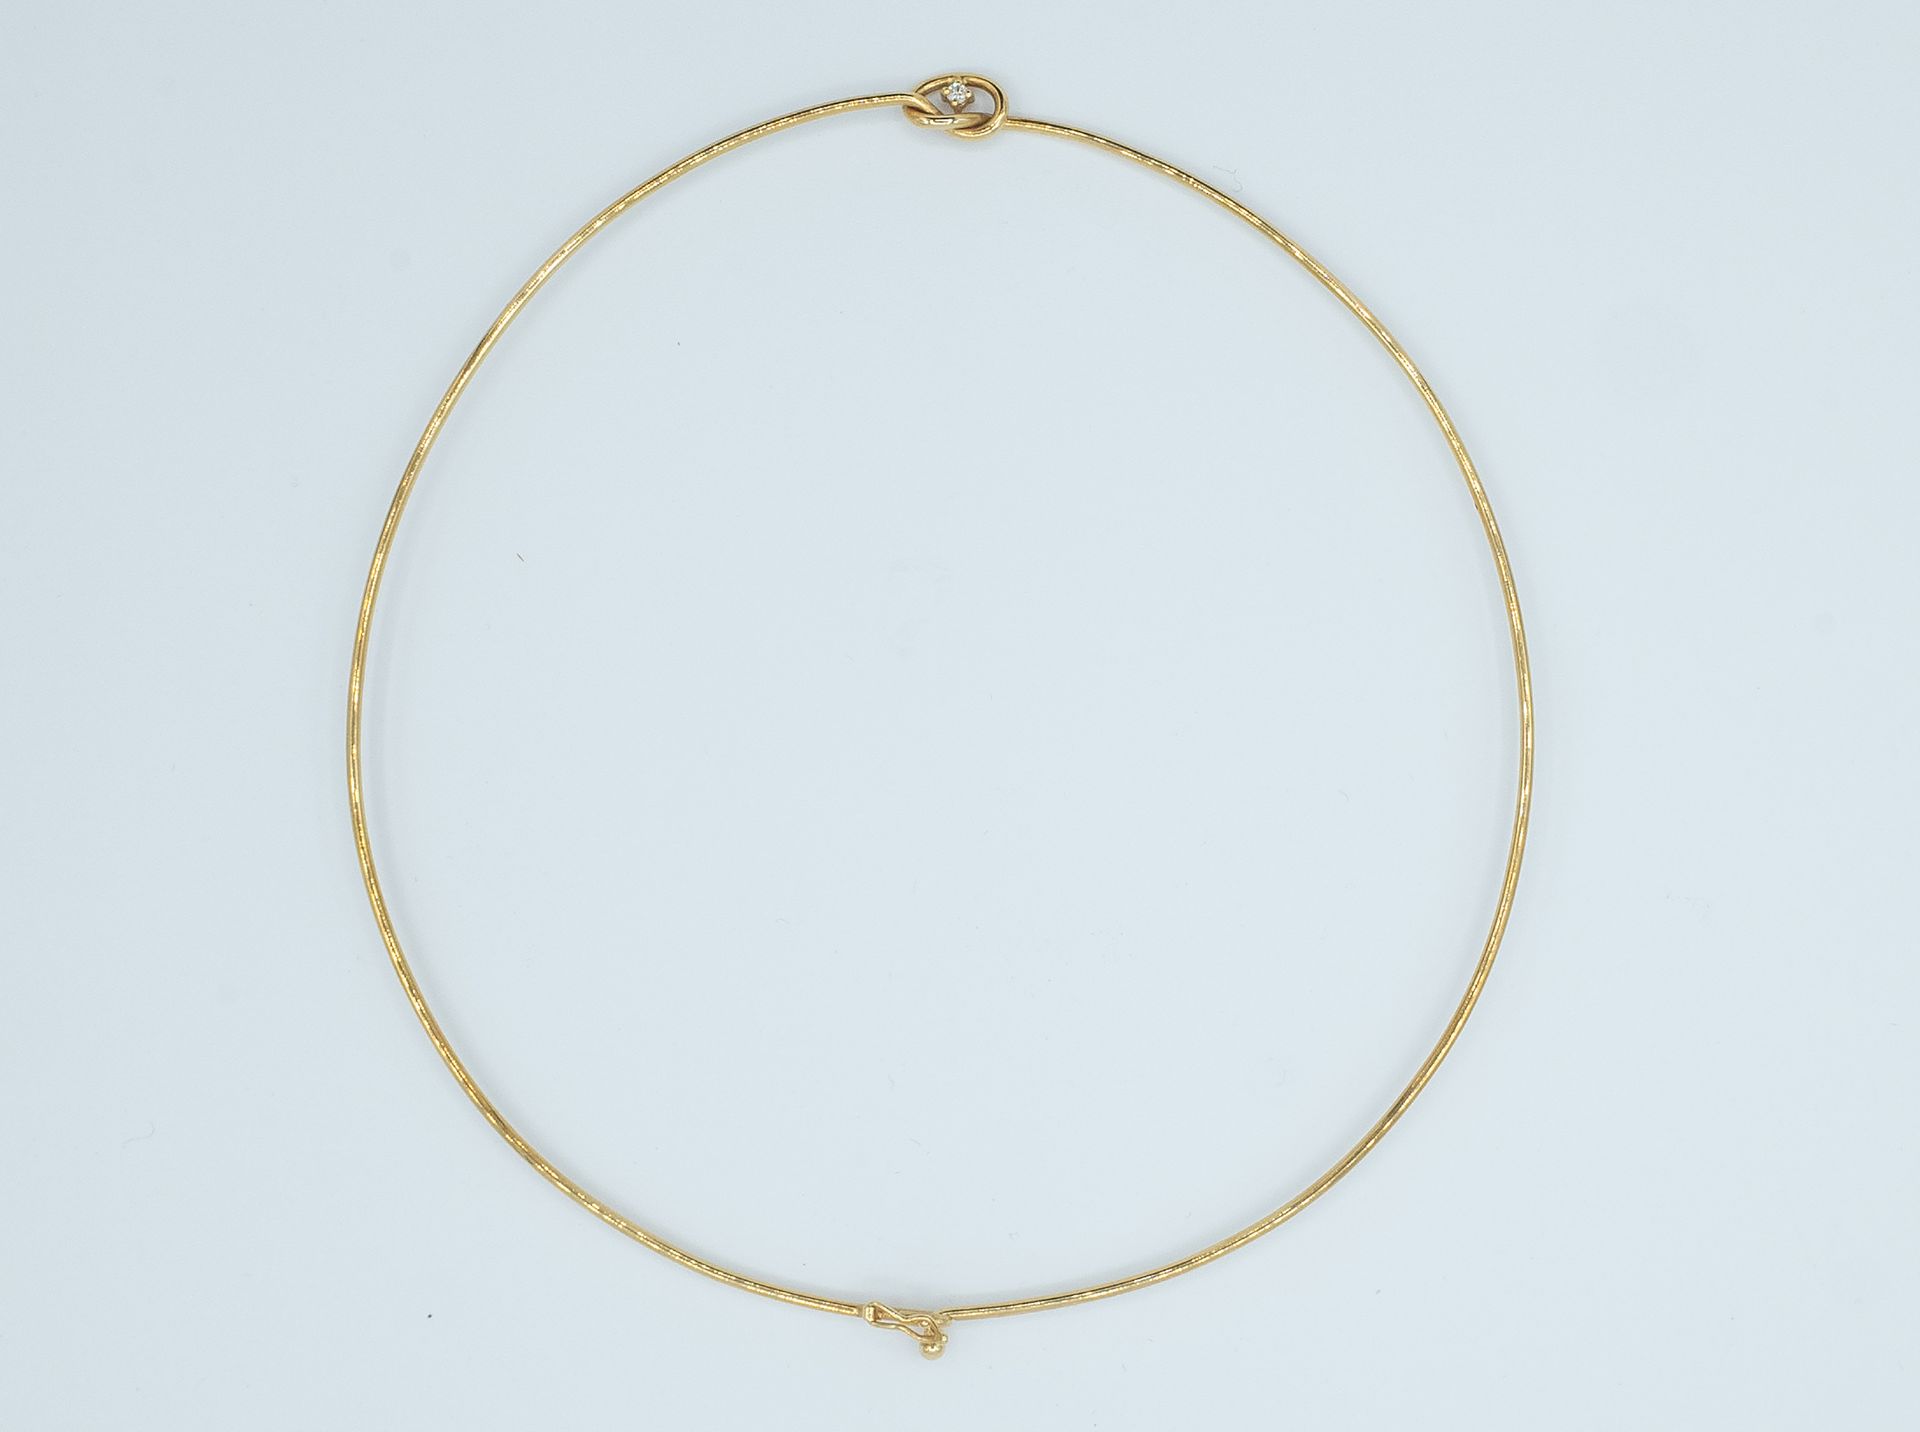 An 18k. yellow gold necklace with a 0,05 ct. brilliant cut diamond